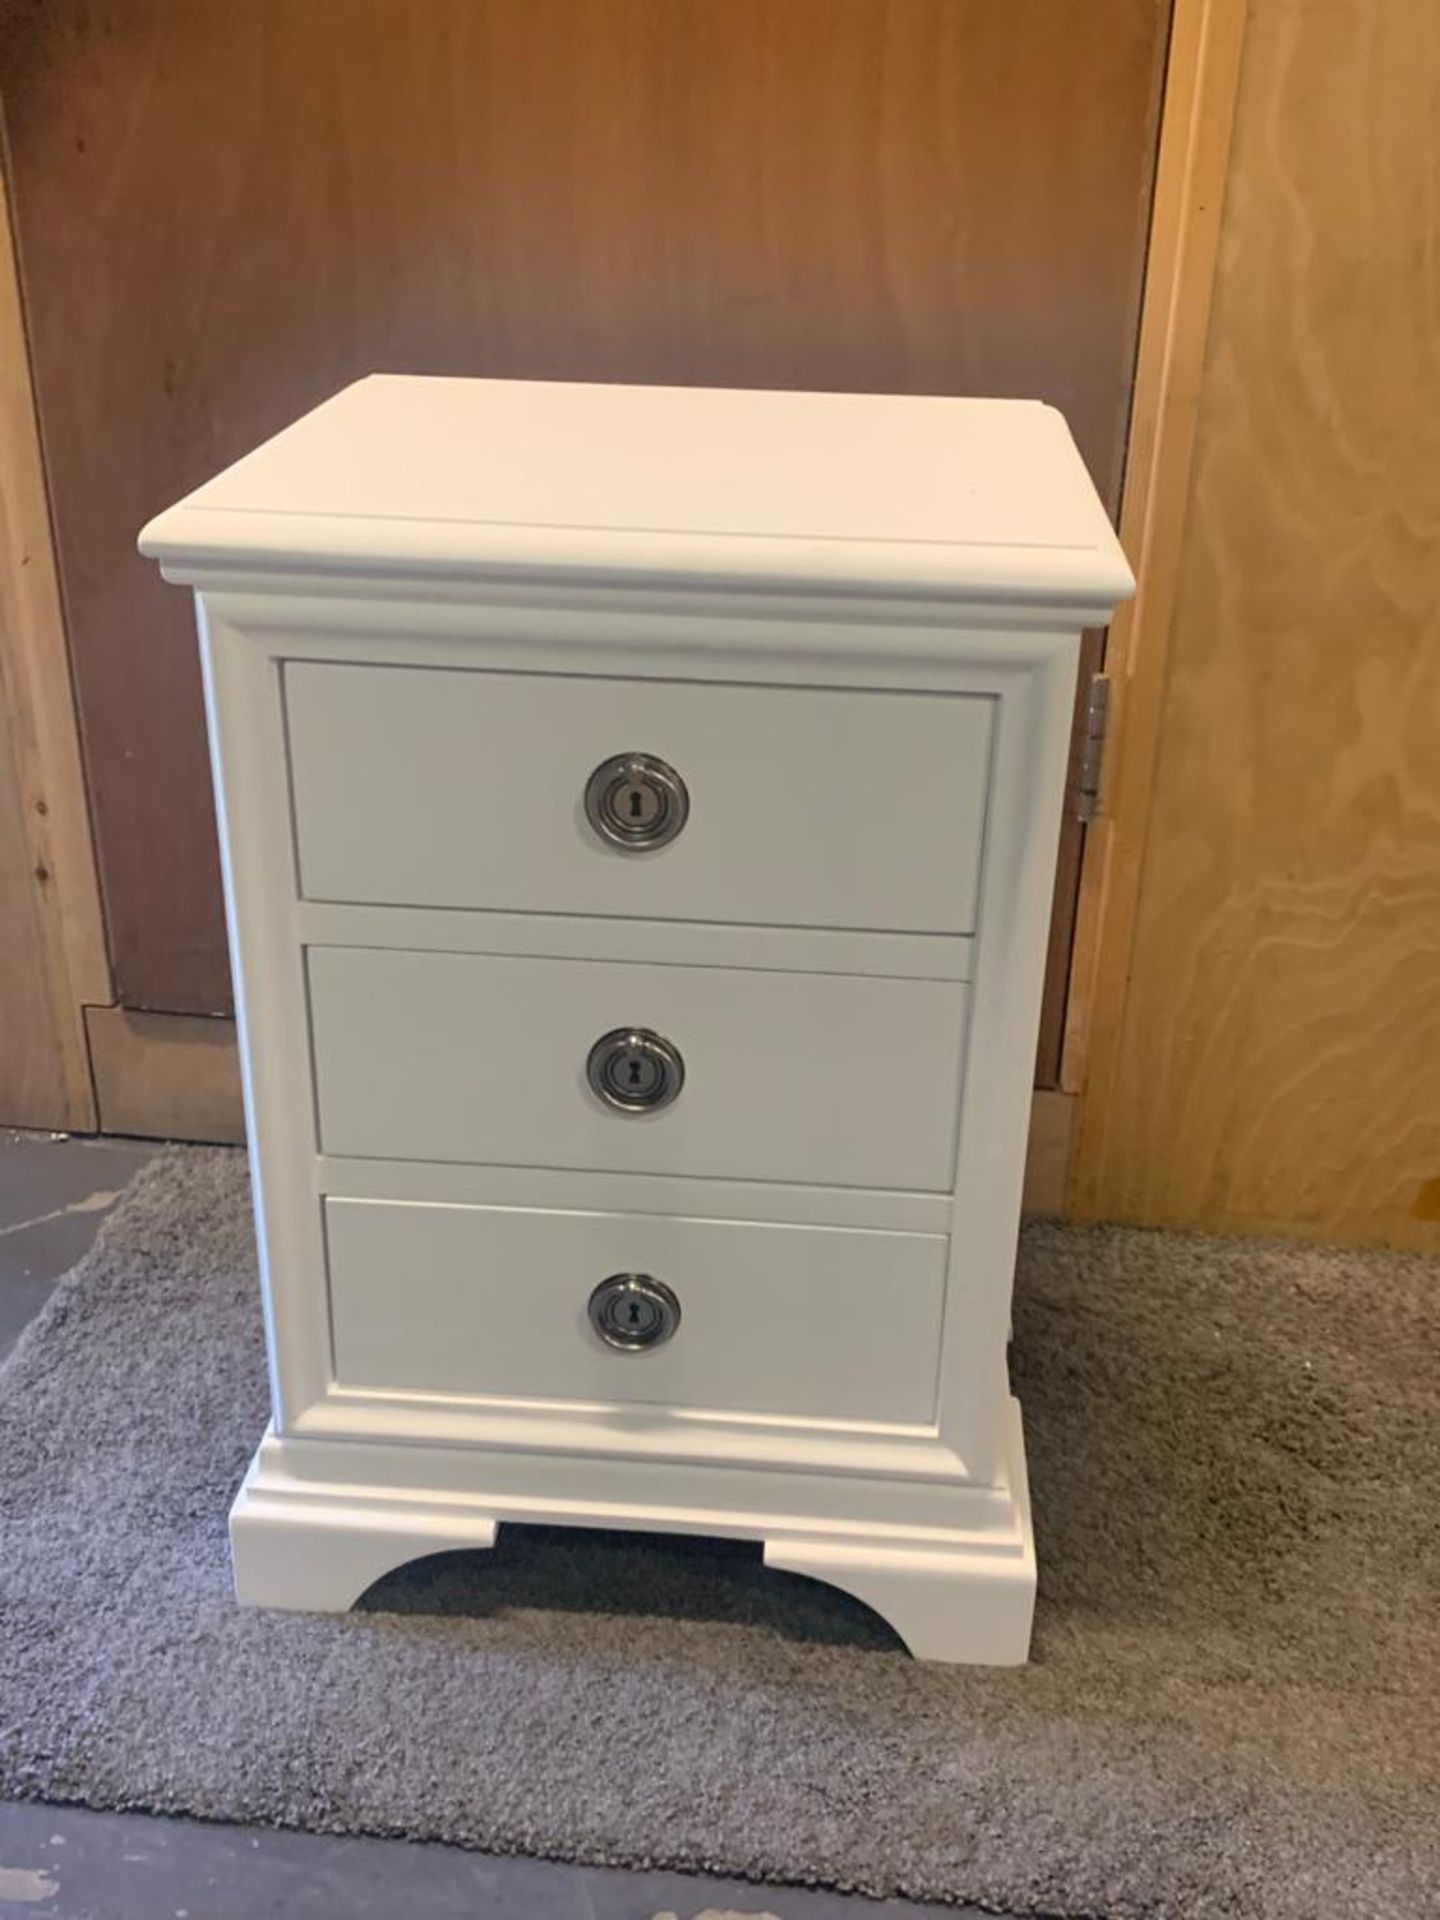 Laura ashley dove grey 3 drawer bedside table Our timeless bedside cabinets are a classic shape that - Image 4 of 4